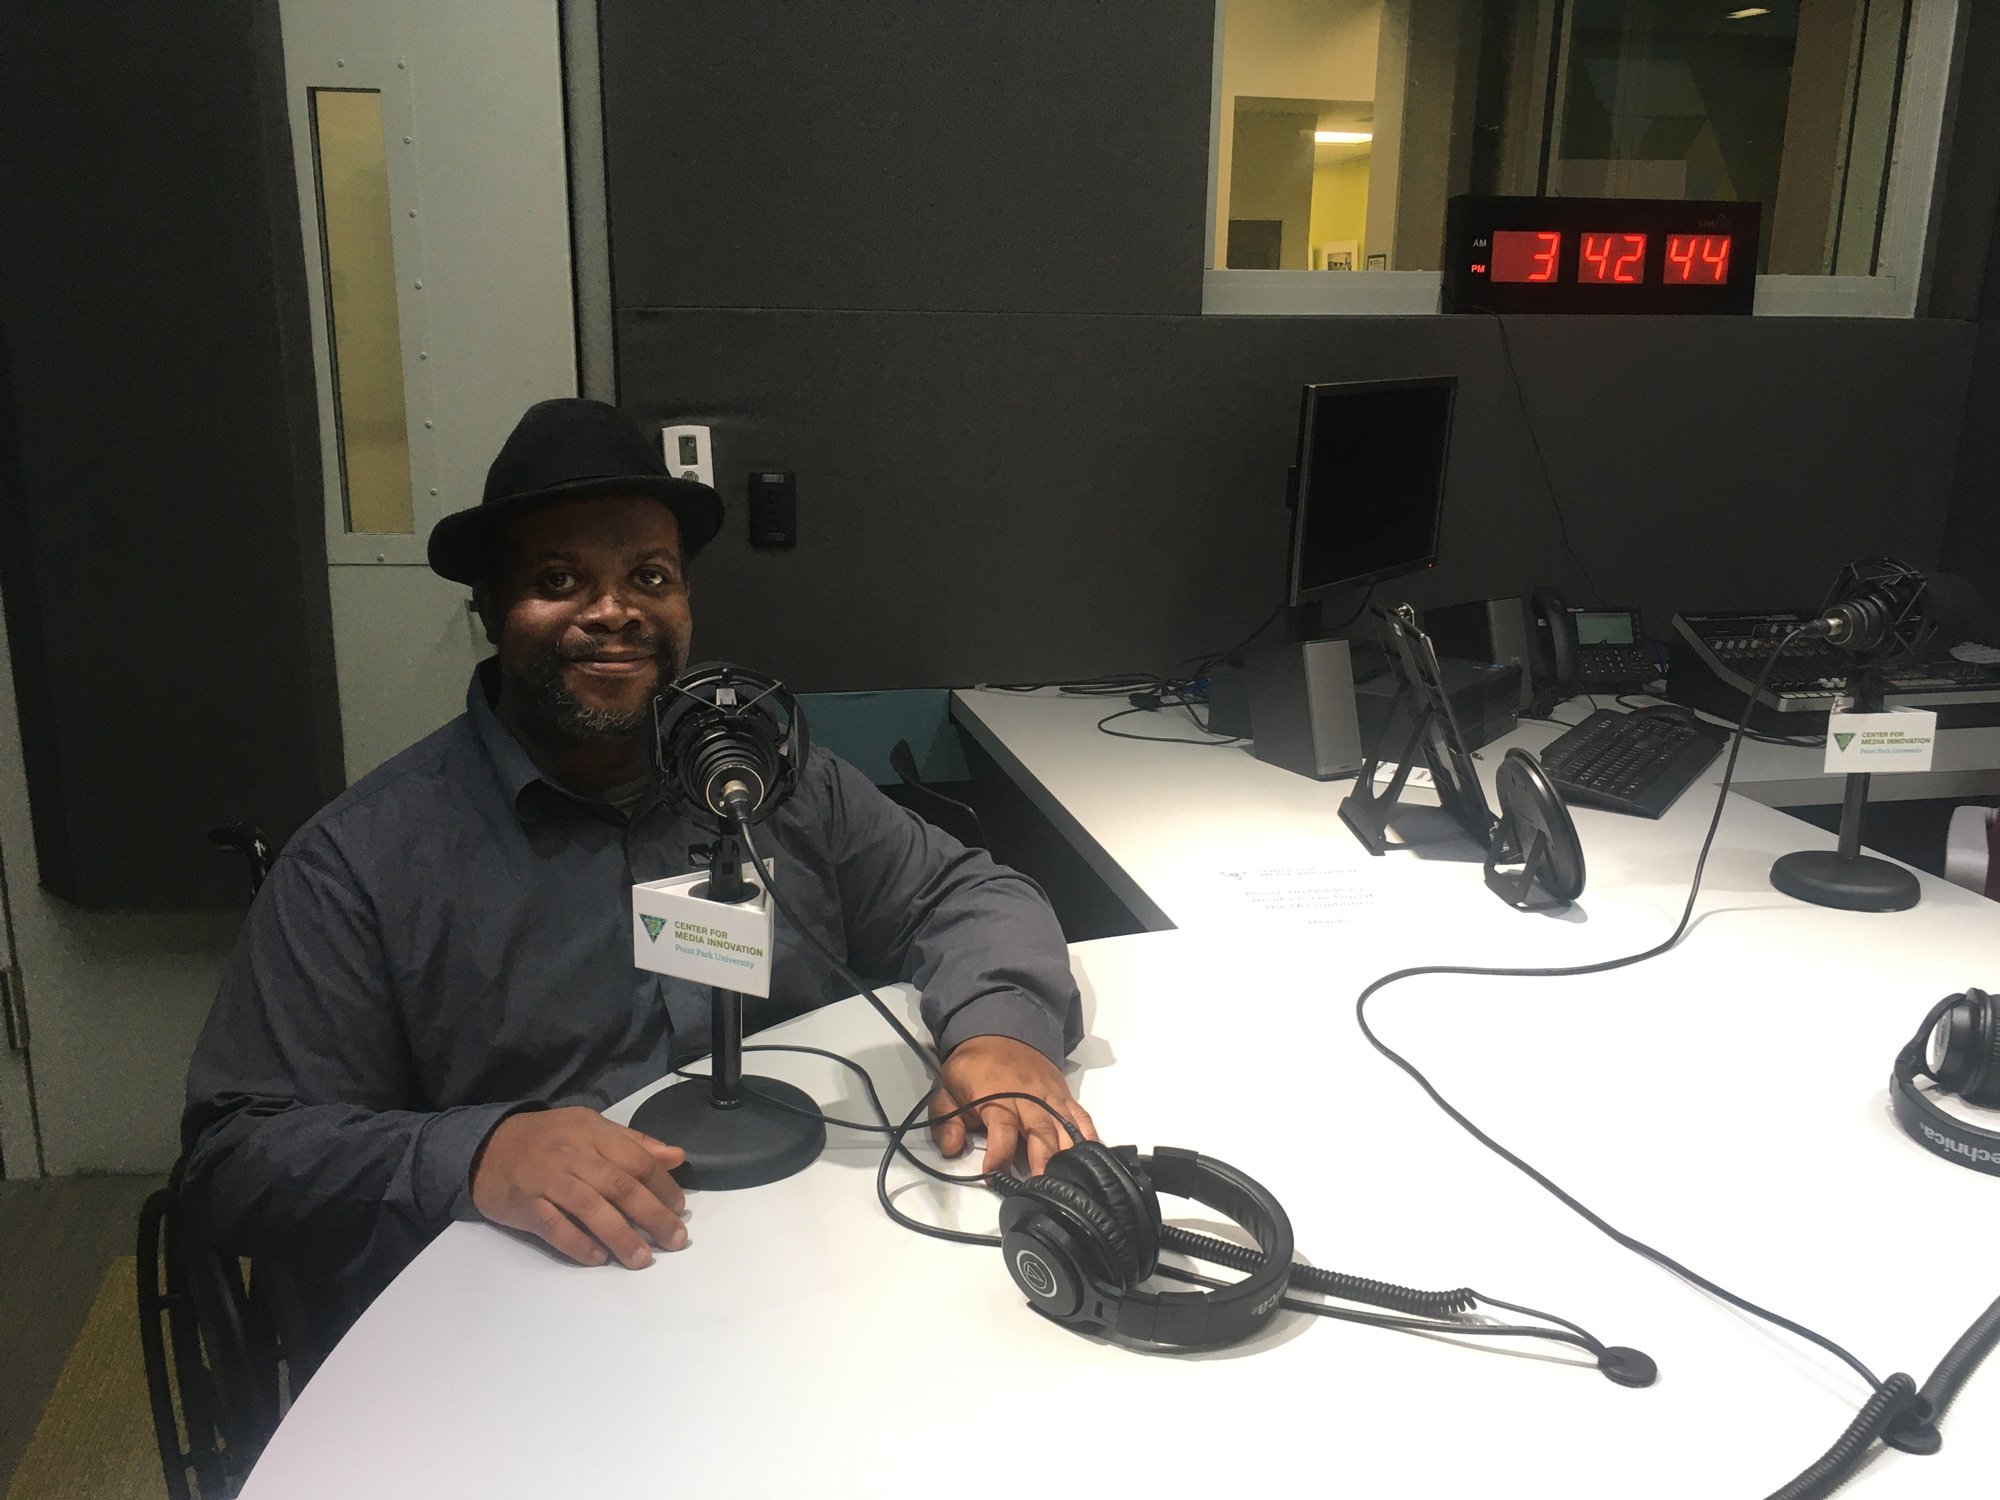 The main photo features David Hale, a black man wearing a fedora and a dark button down shirt. in front of a microphone in a podcast studio.